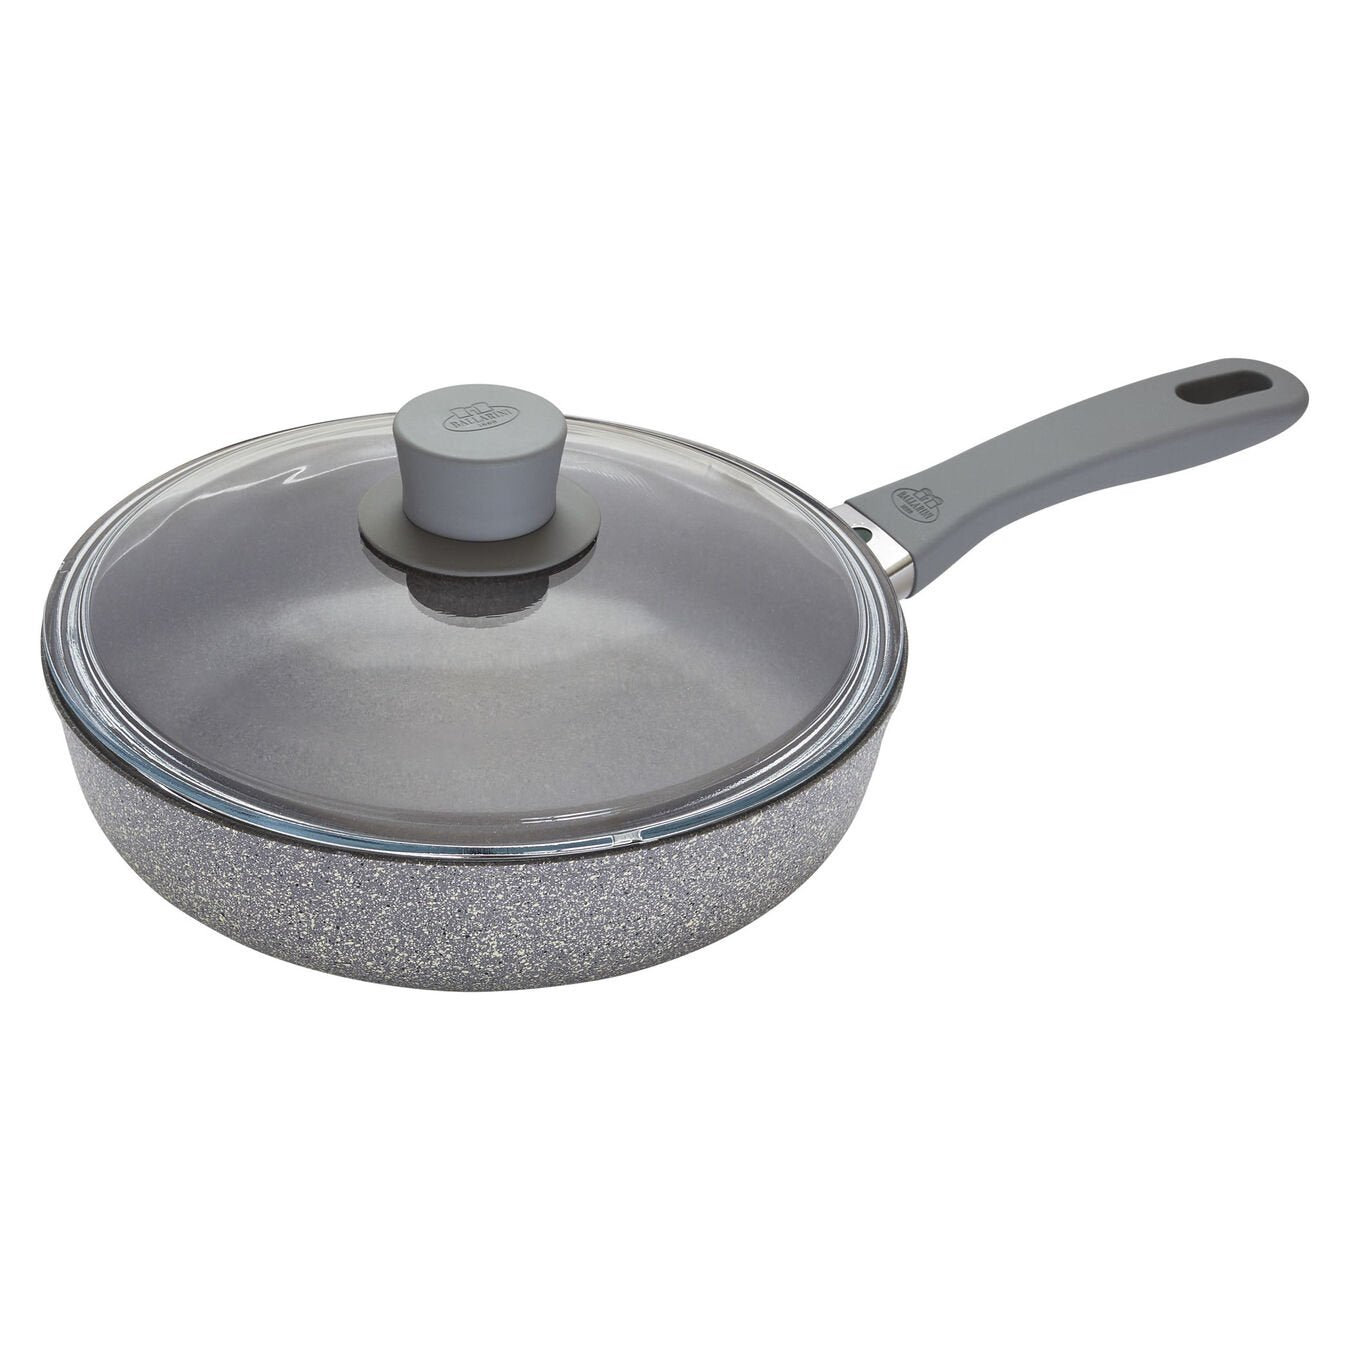 sauté pan with lid on white background